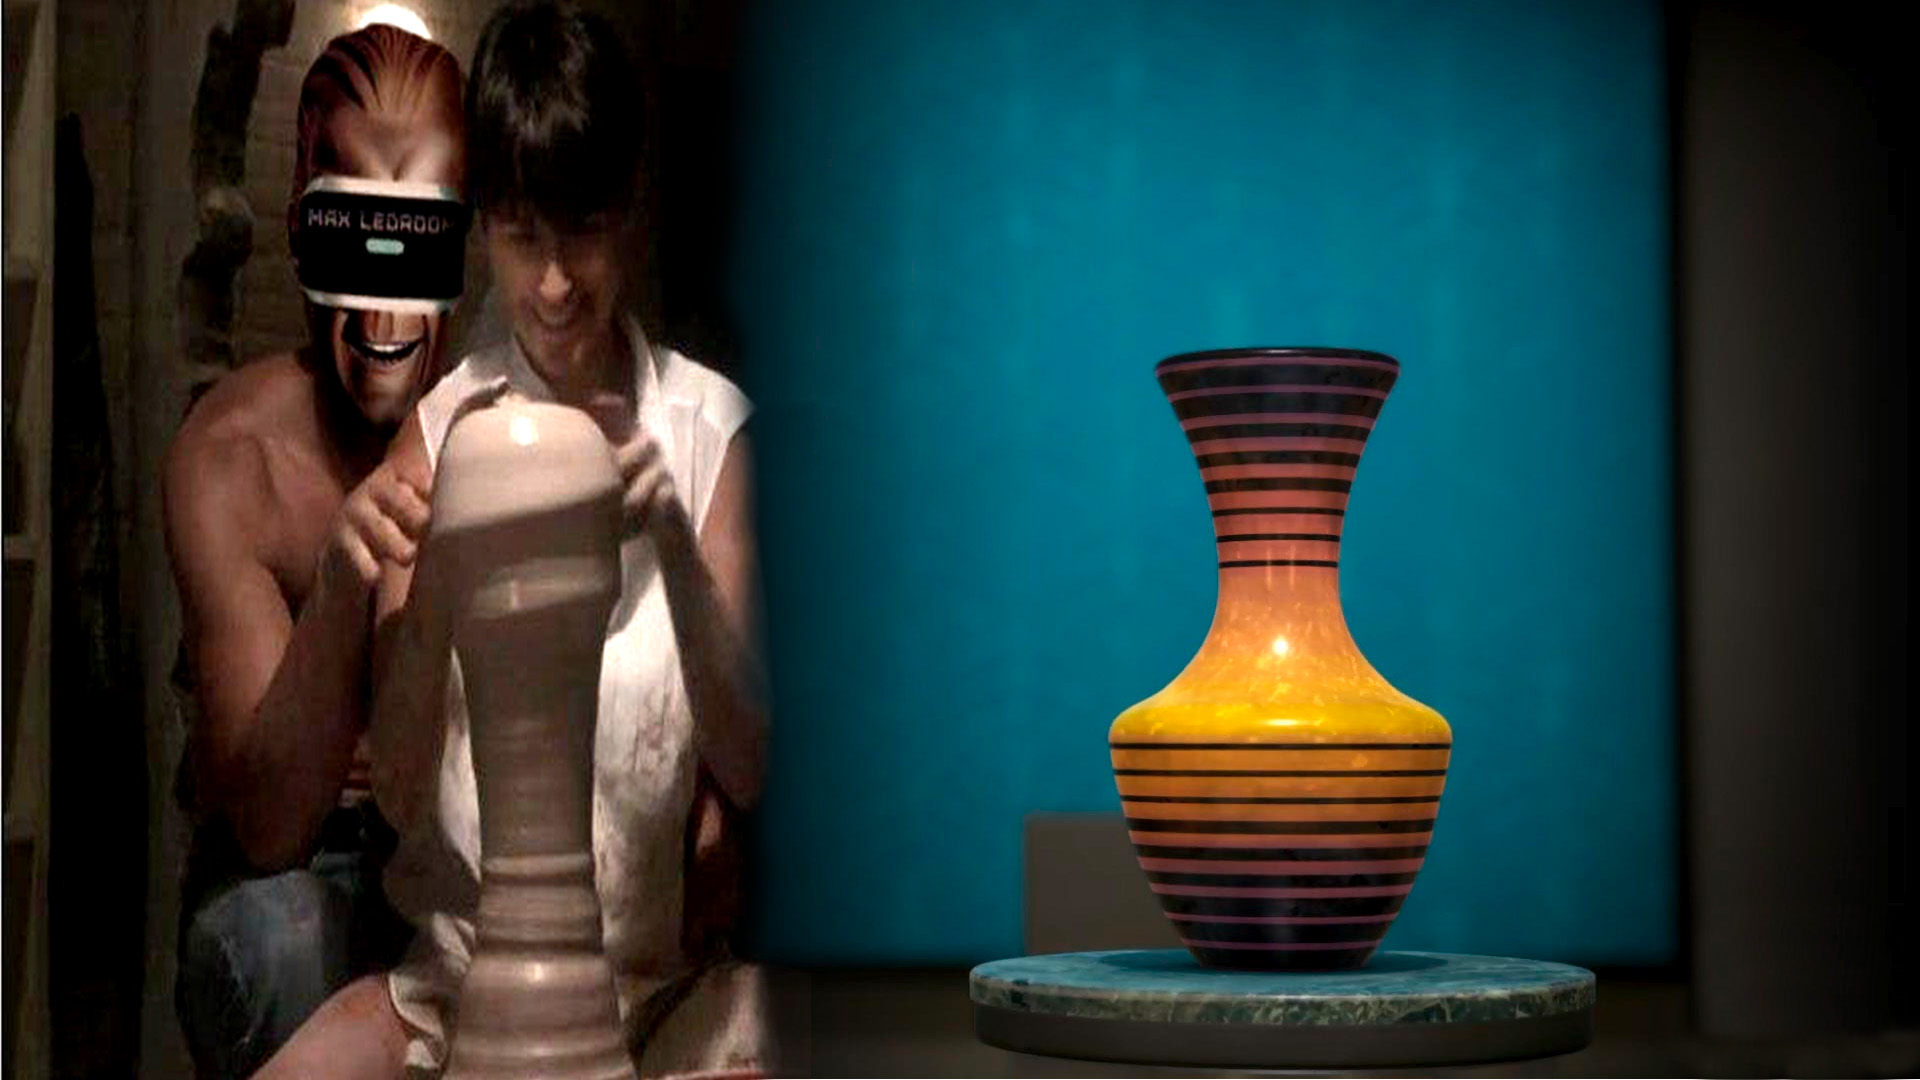 lets create pottery full version